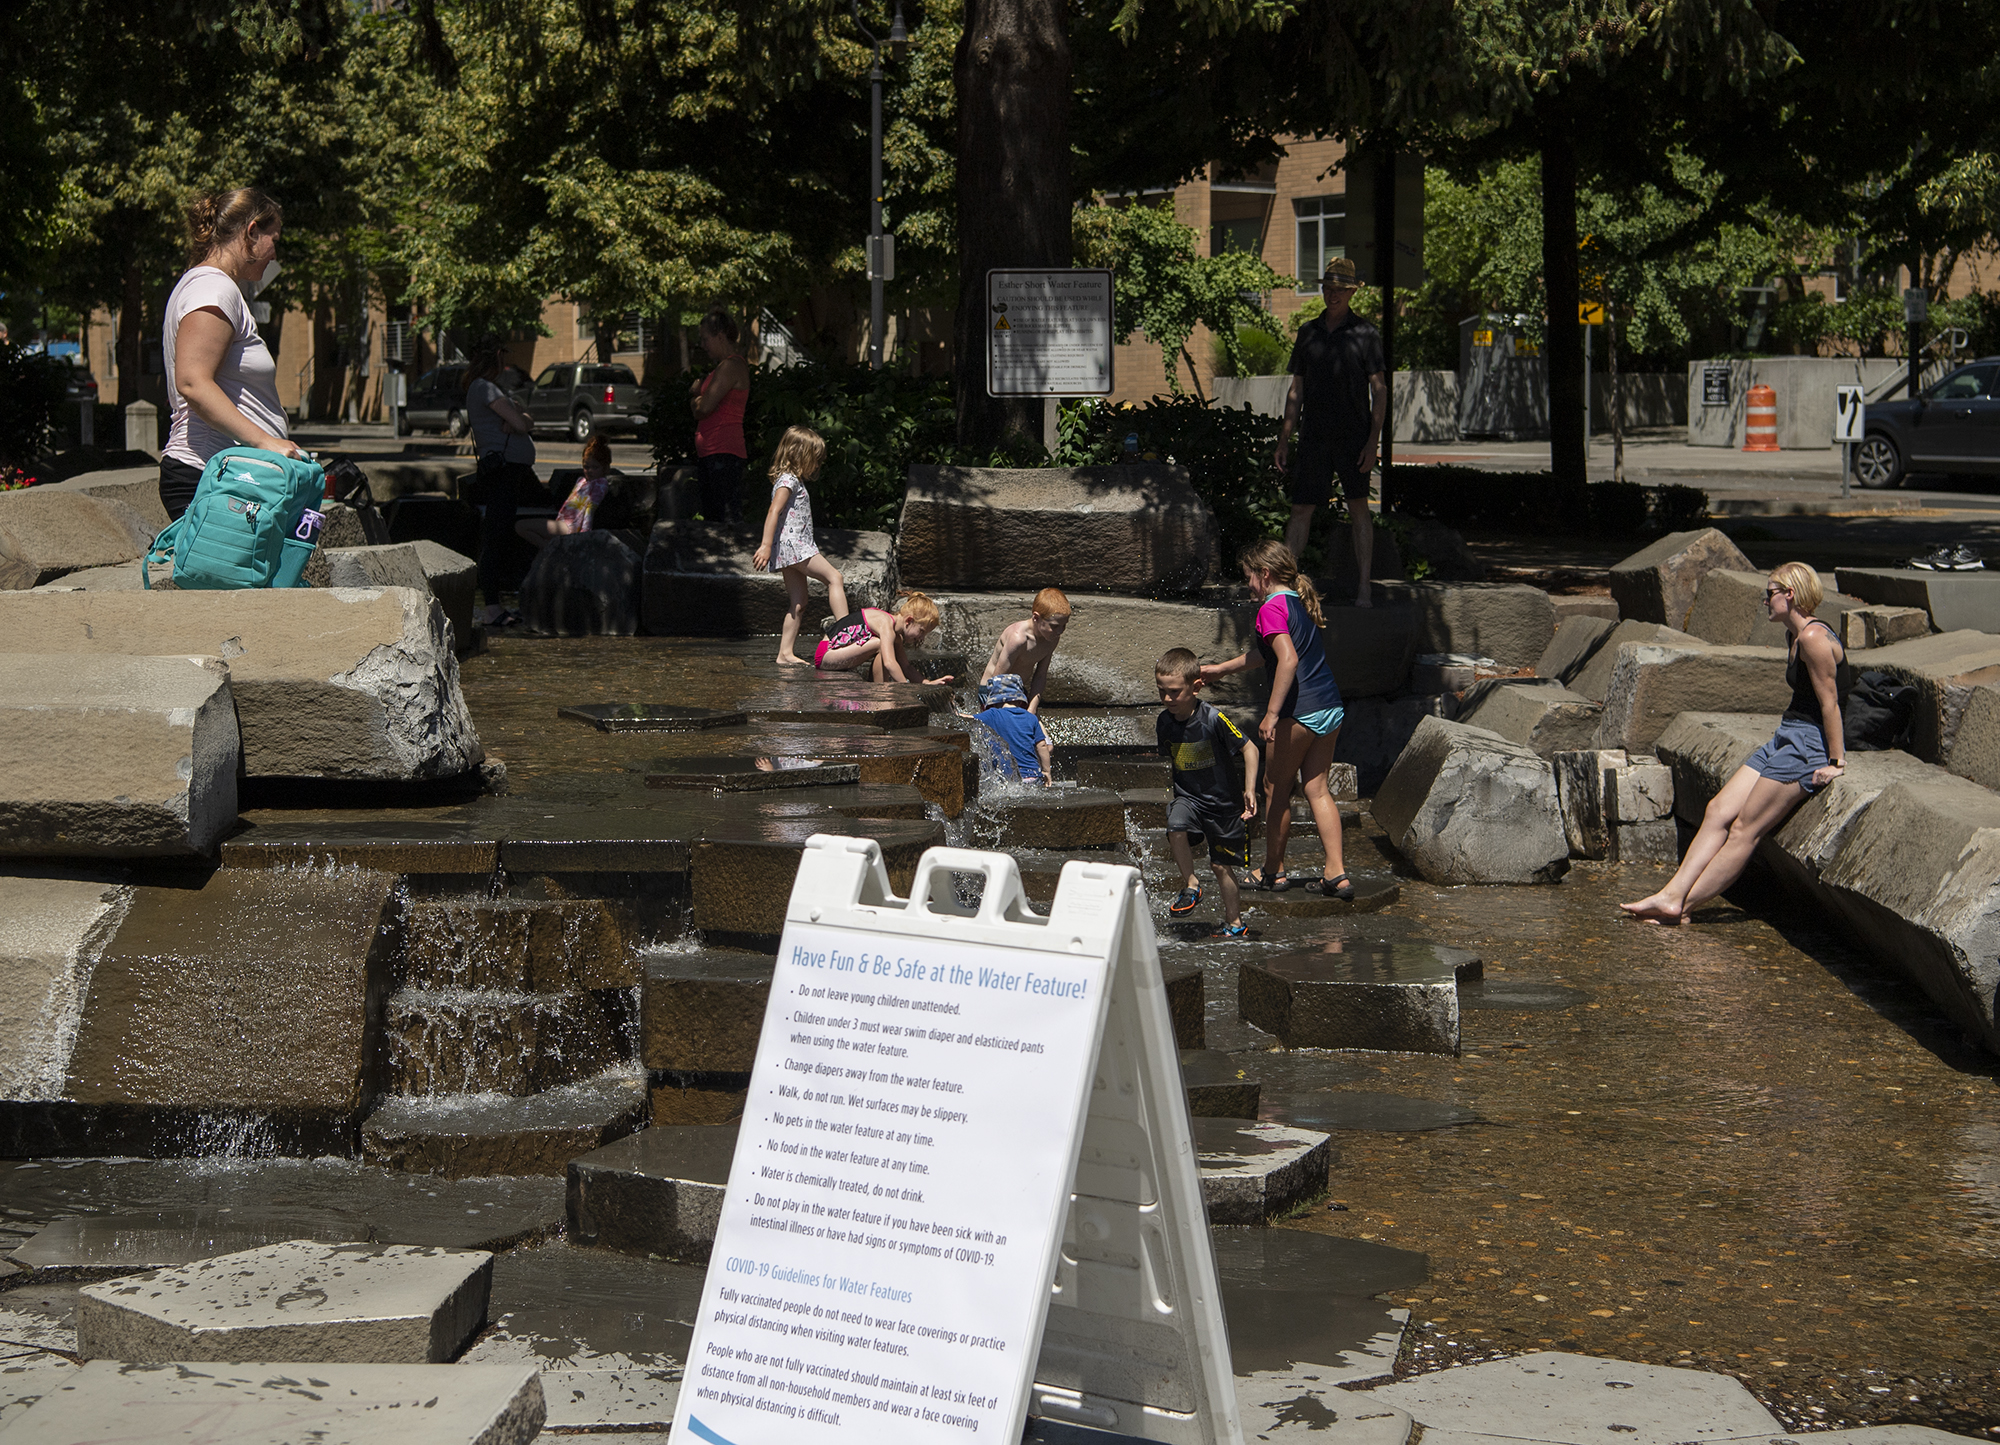 Kids play in the water on Friday, June 25, 2021, at the Esther Short Water Feature.